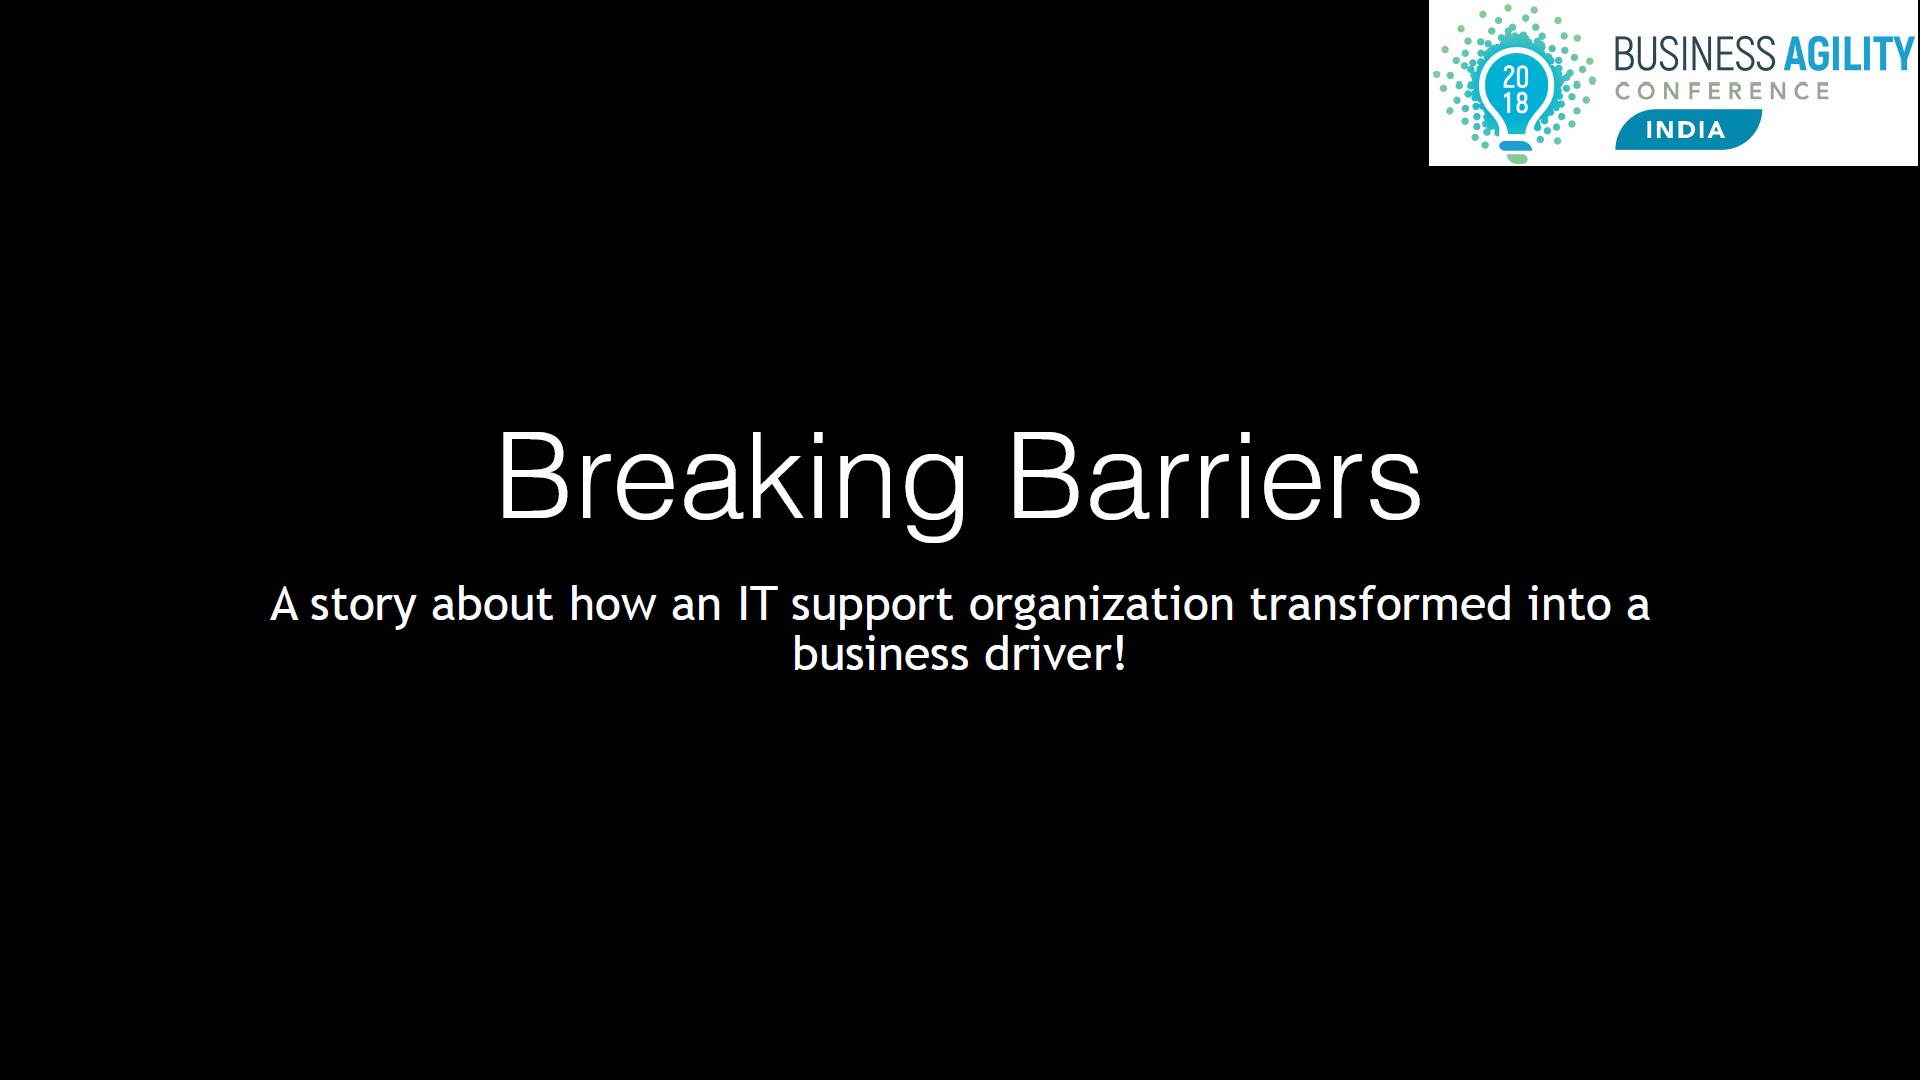 Breaking Barriers to Achieve Business Agility